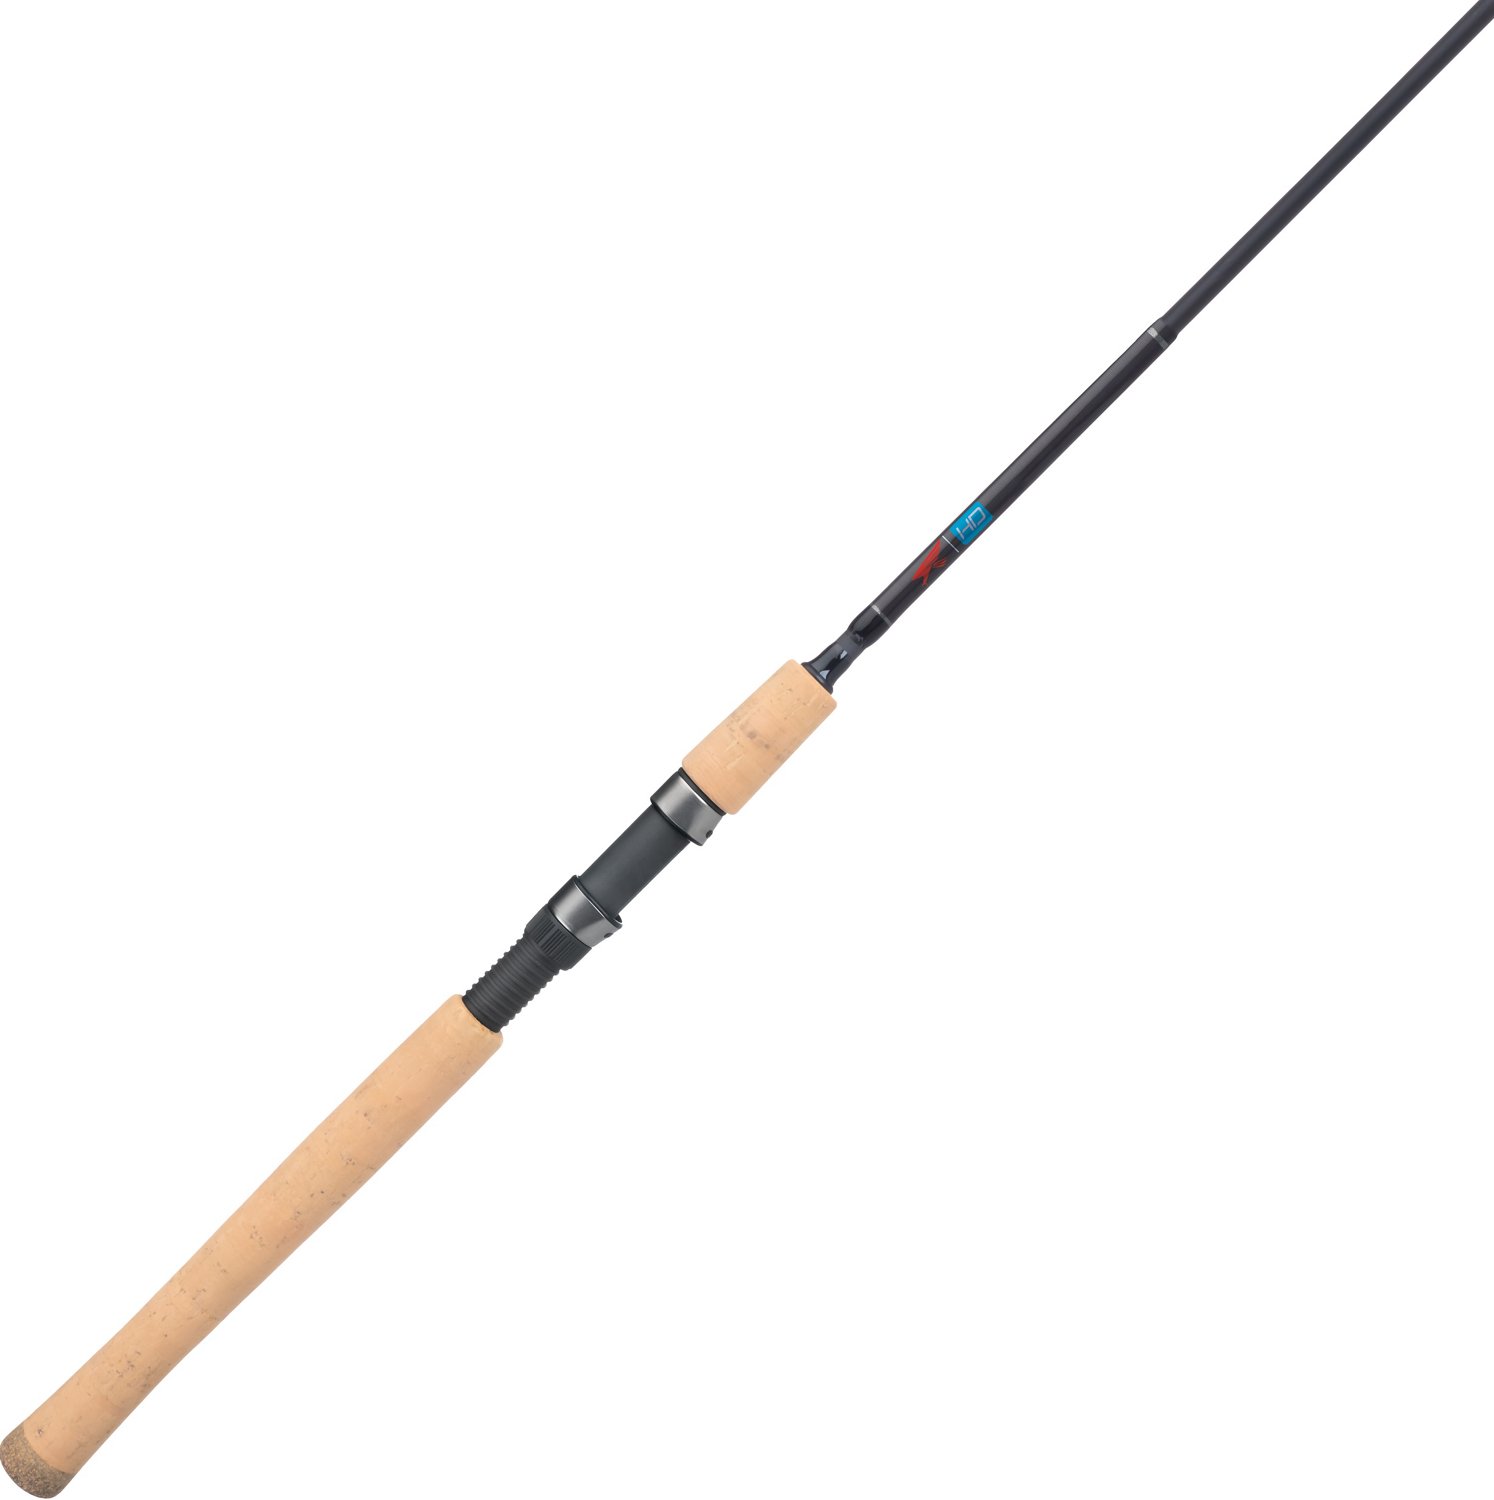 Academy Sports + Outdoors Falcon HD 7' Freshwater/Saltwater